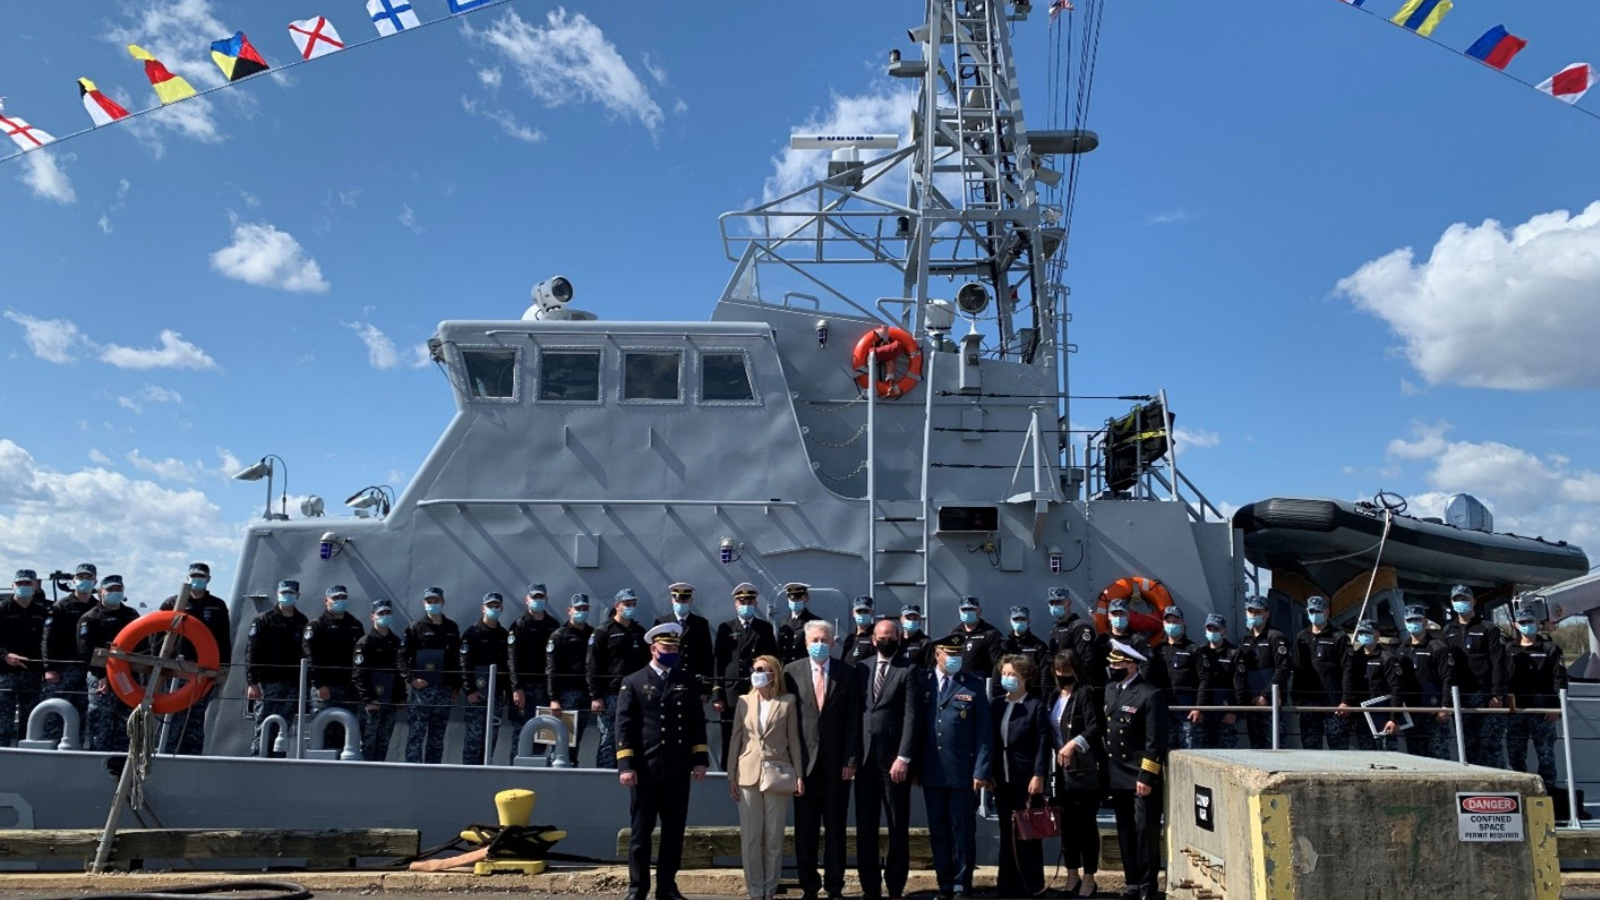 Ukrainian naval personnel and their American trainers pose in front of Sumy on graduation day. (Photo courtesy of the U.S. Coast Guard)